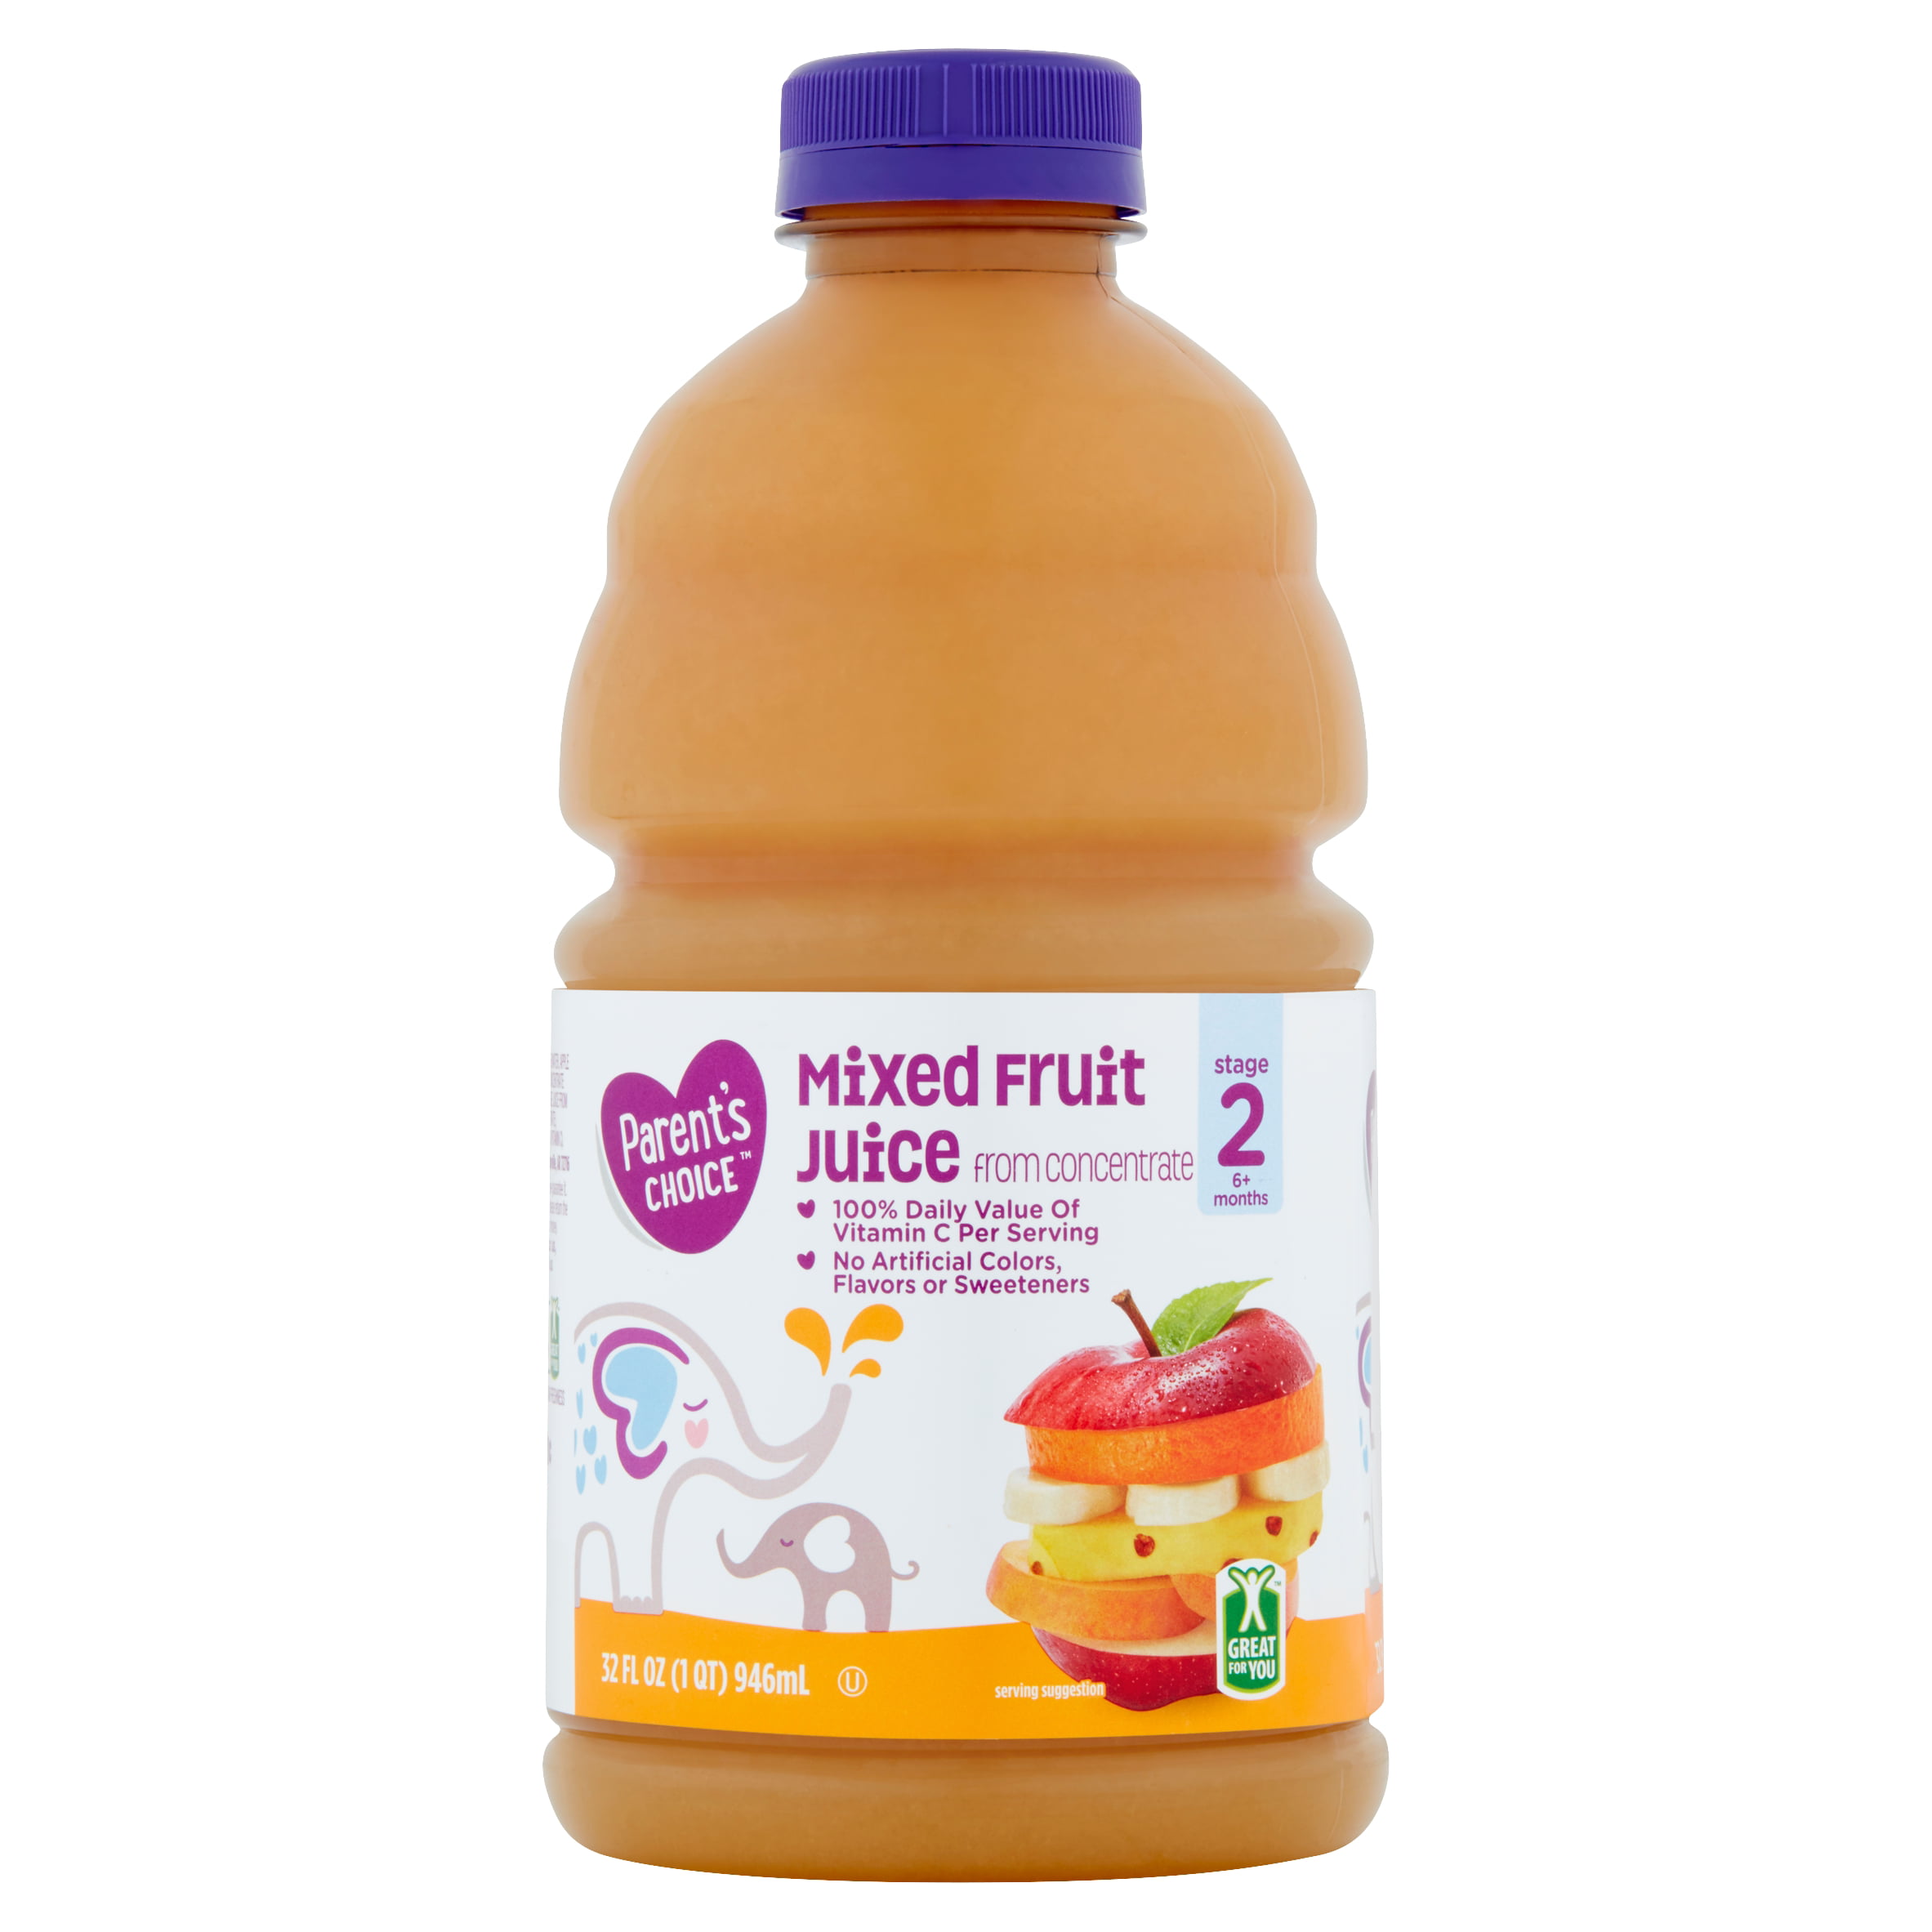 Choice 100% Mixed Fruit Juice, Stage 2 